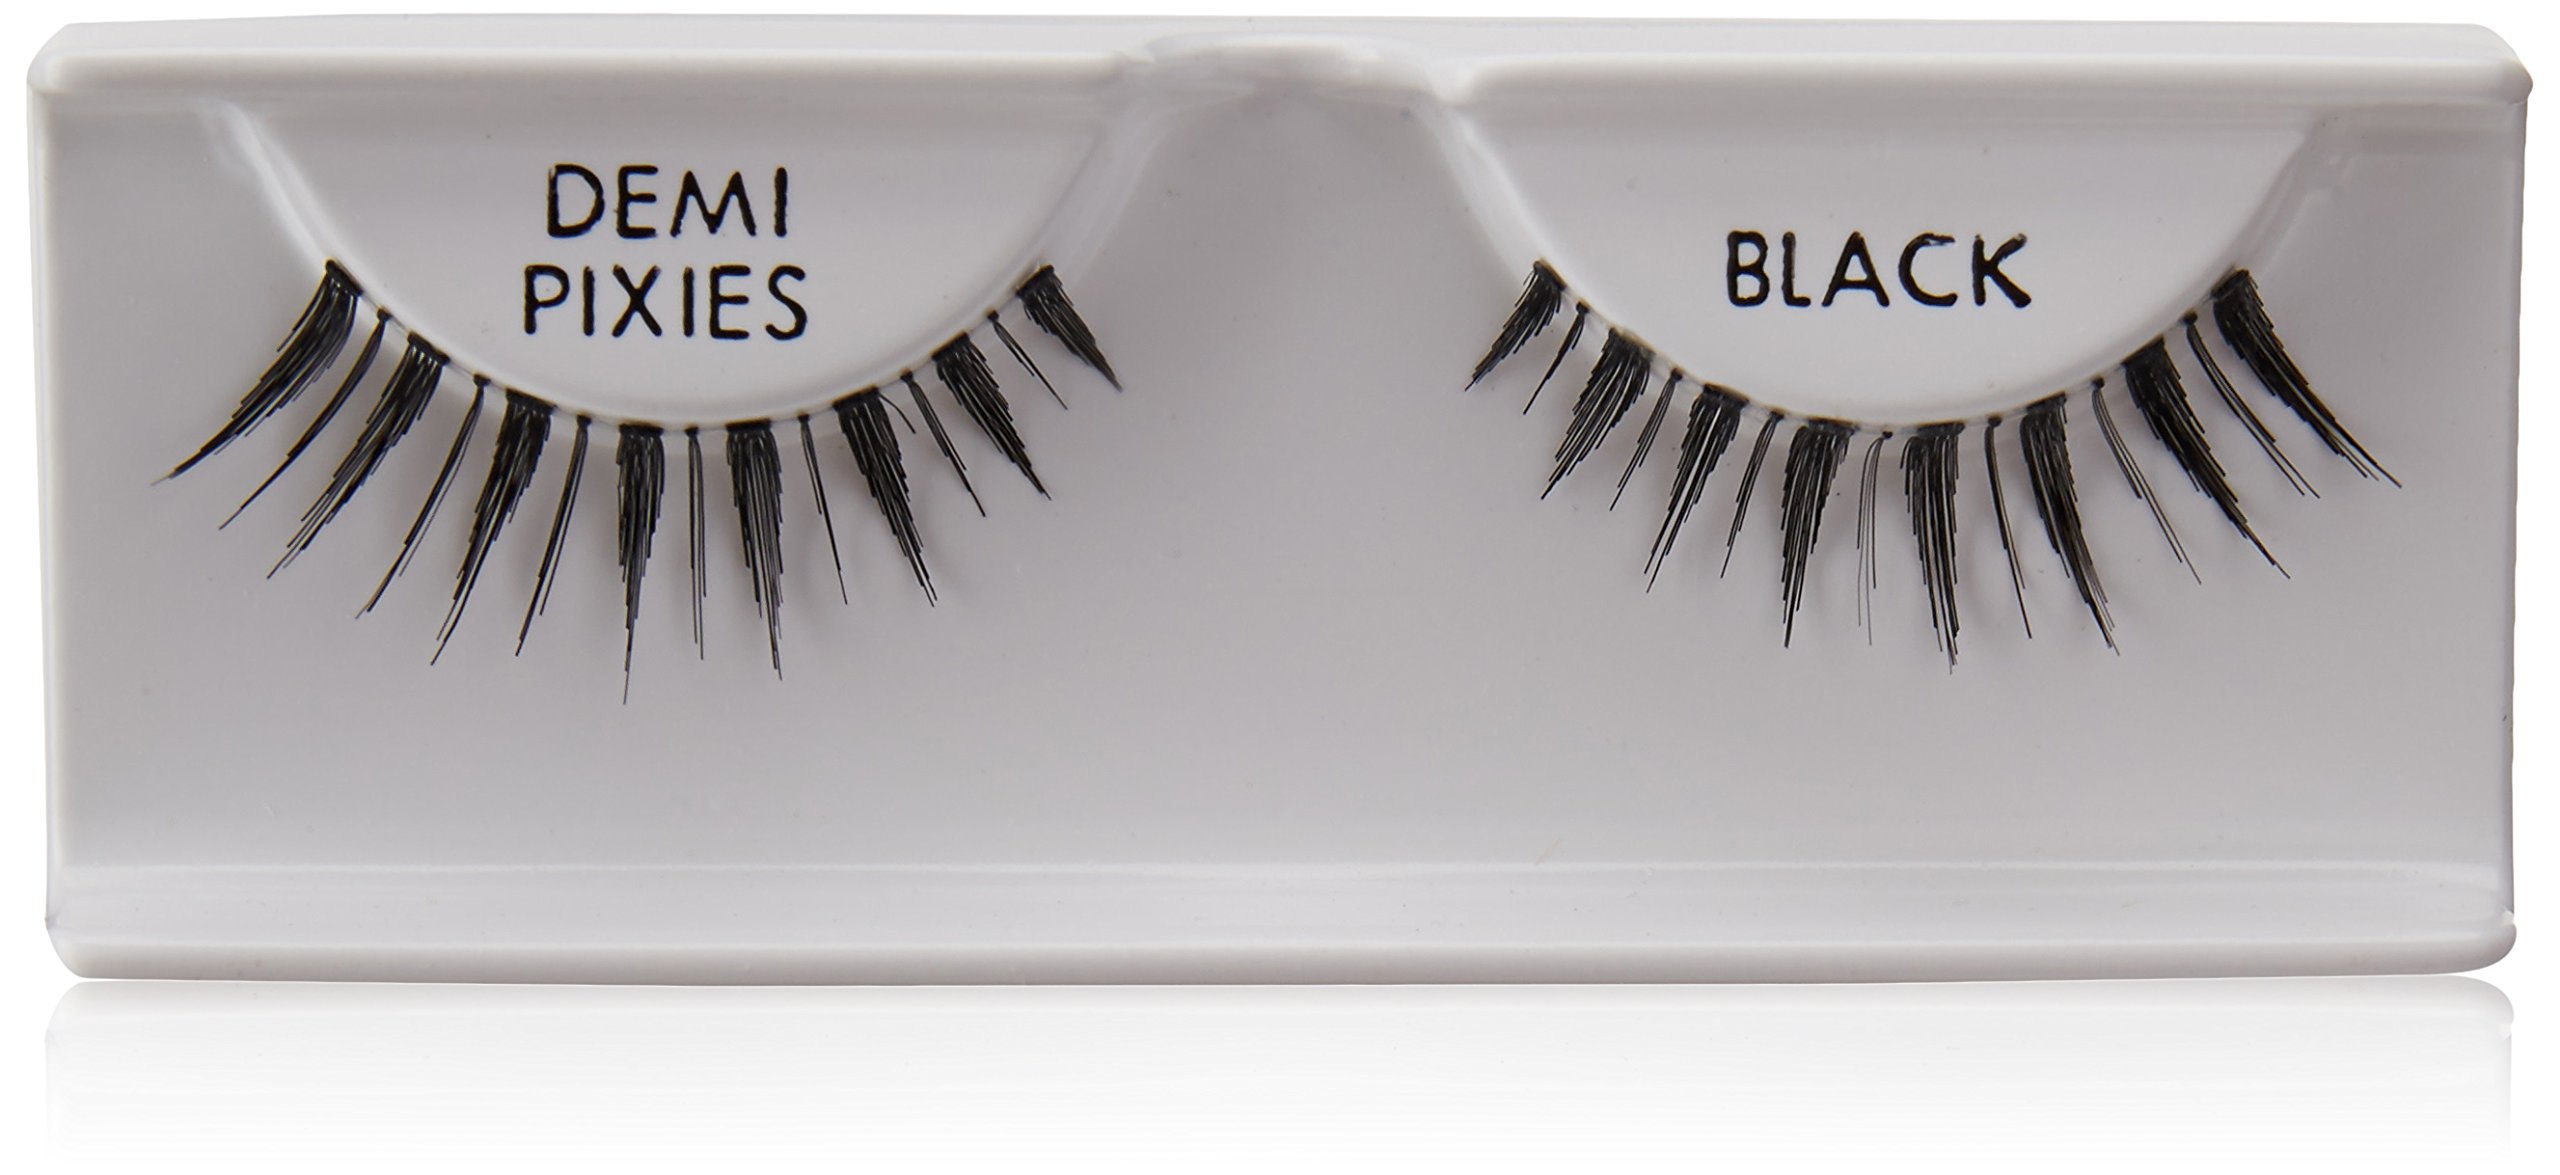 Ardell Invisiband Lashes, Demi Pixies Black, 1 Pair (Pack of 3)